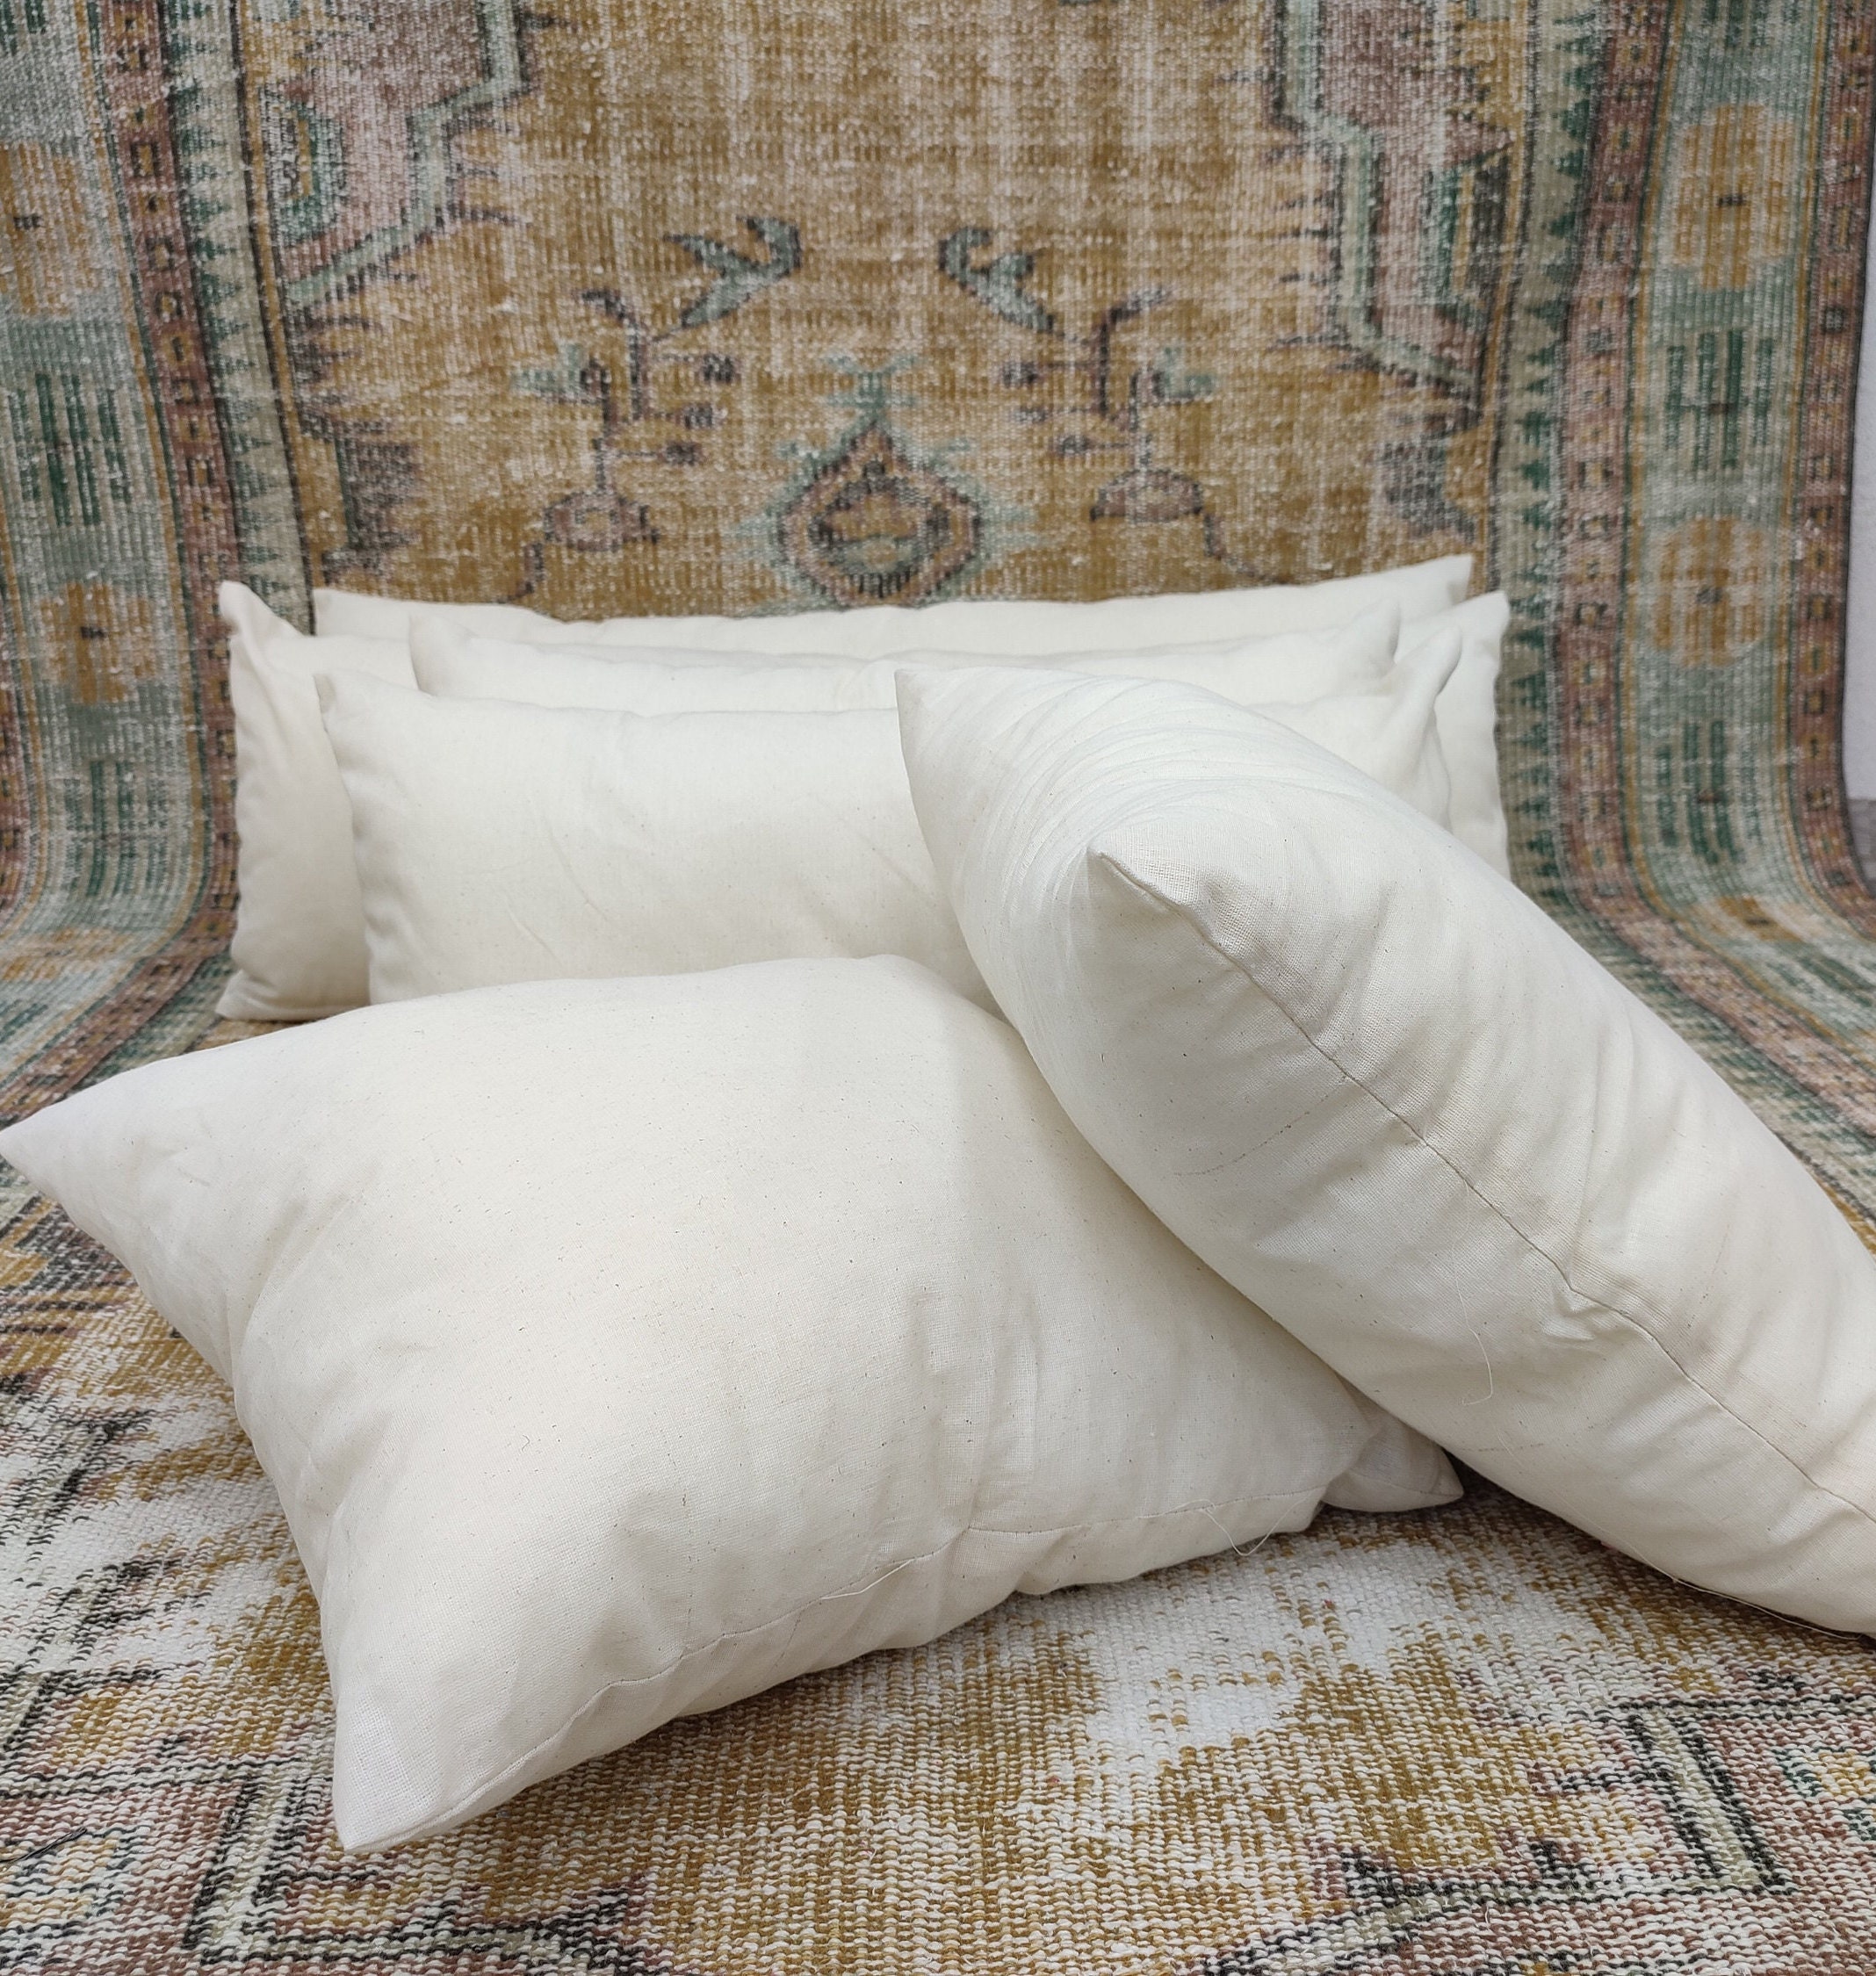 Westex 601426 14 x 26 in. Feather Filled Cushion Insert, White